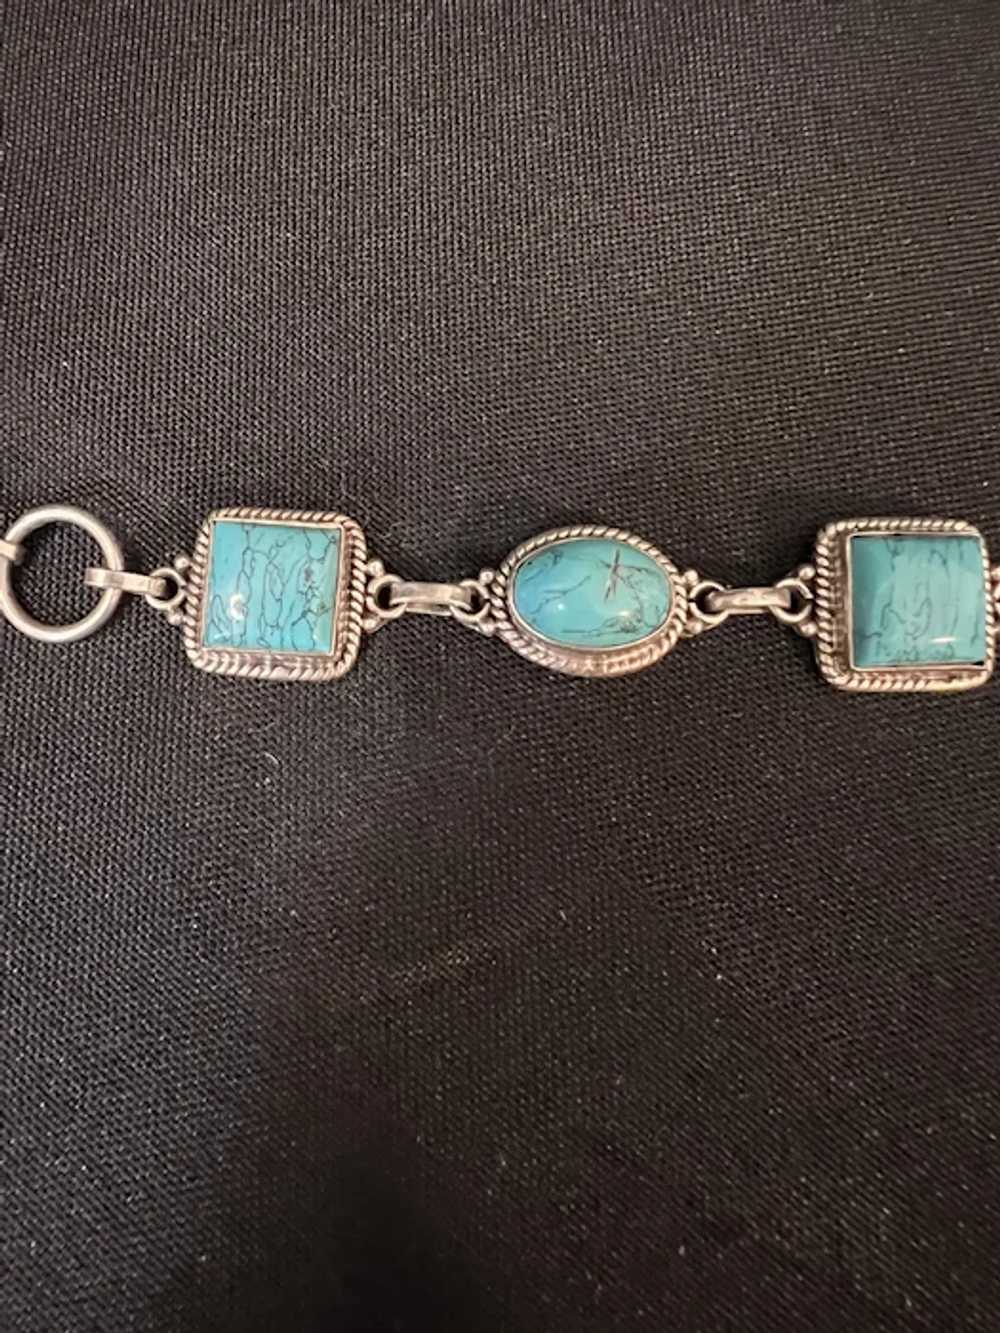 925 Sterling Silver and Turquoise Bracelet - image 2